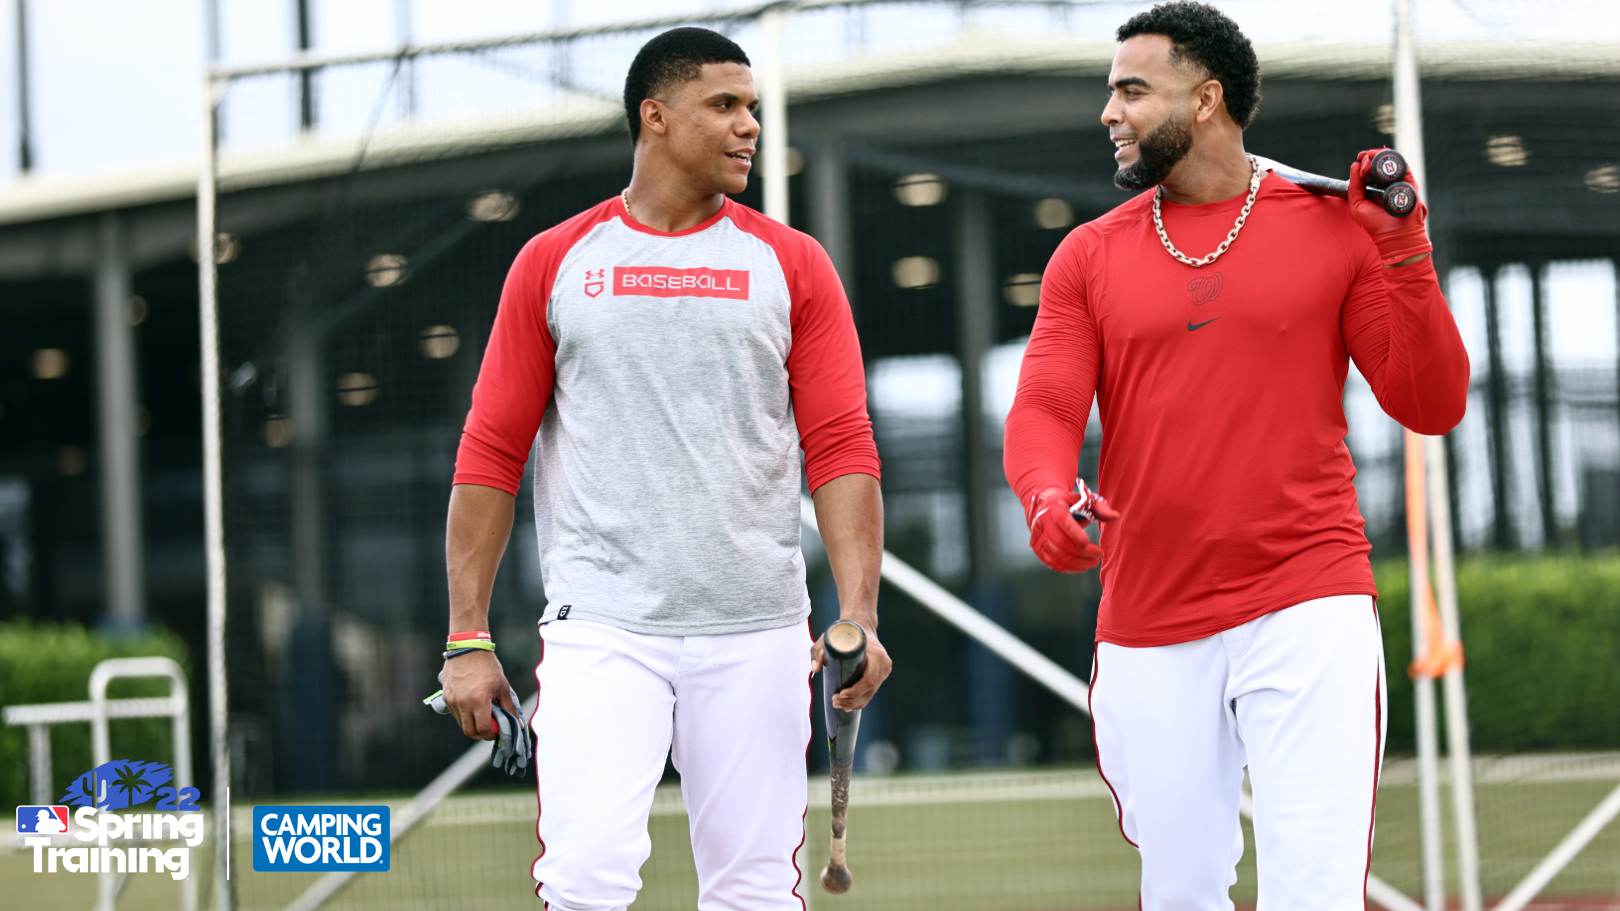 We stopped by Nats camp today! Here's Nelson Cruz in Nats gear (and a Juan  Soto photo for good measure too) : r/Nationals